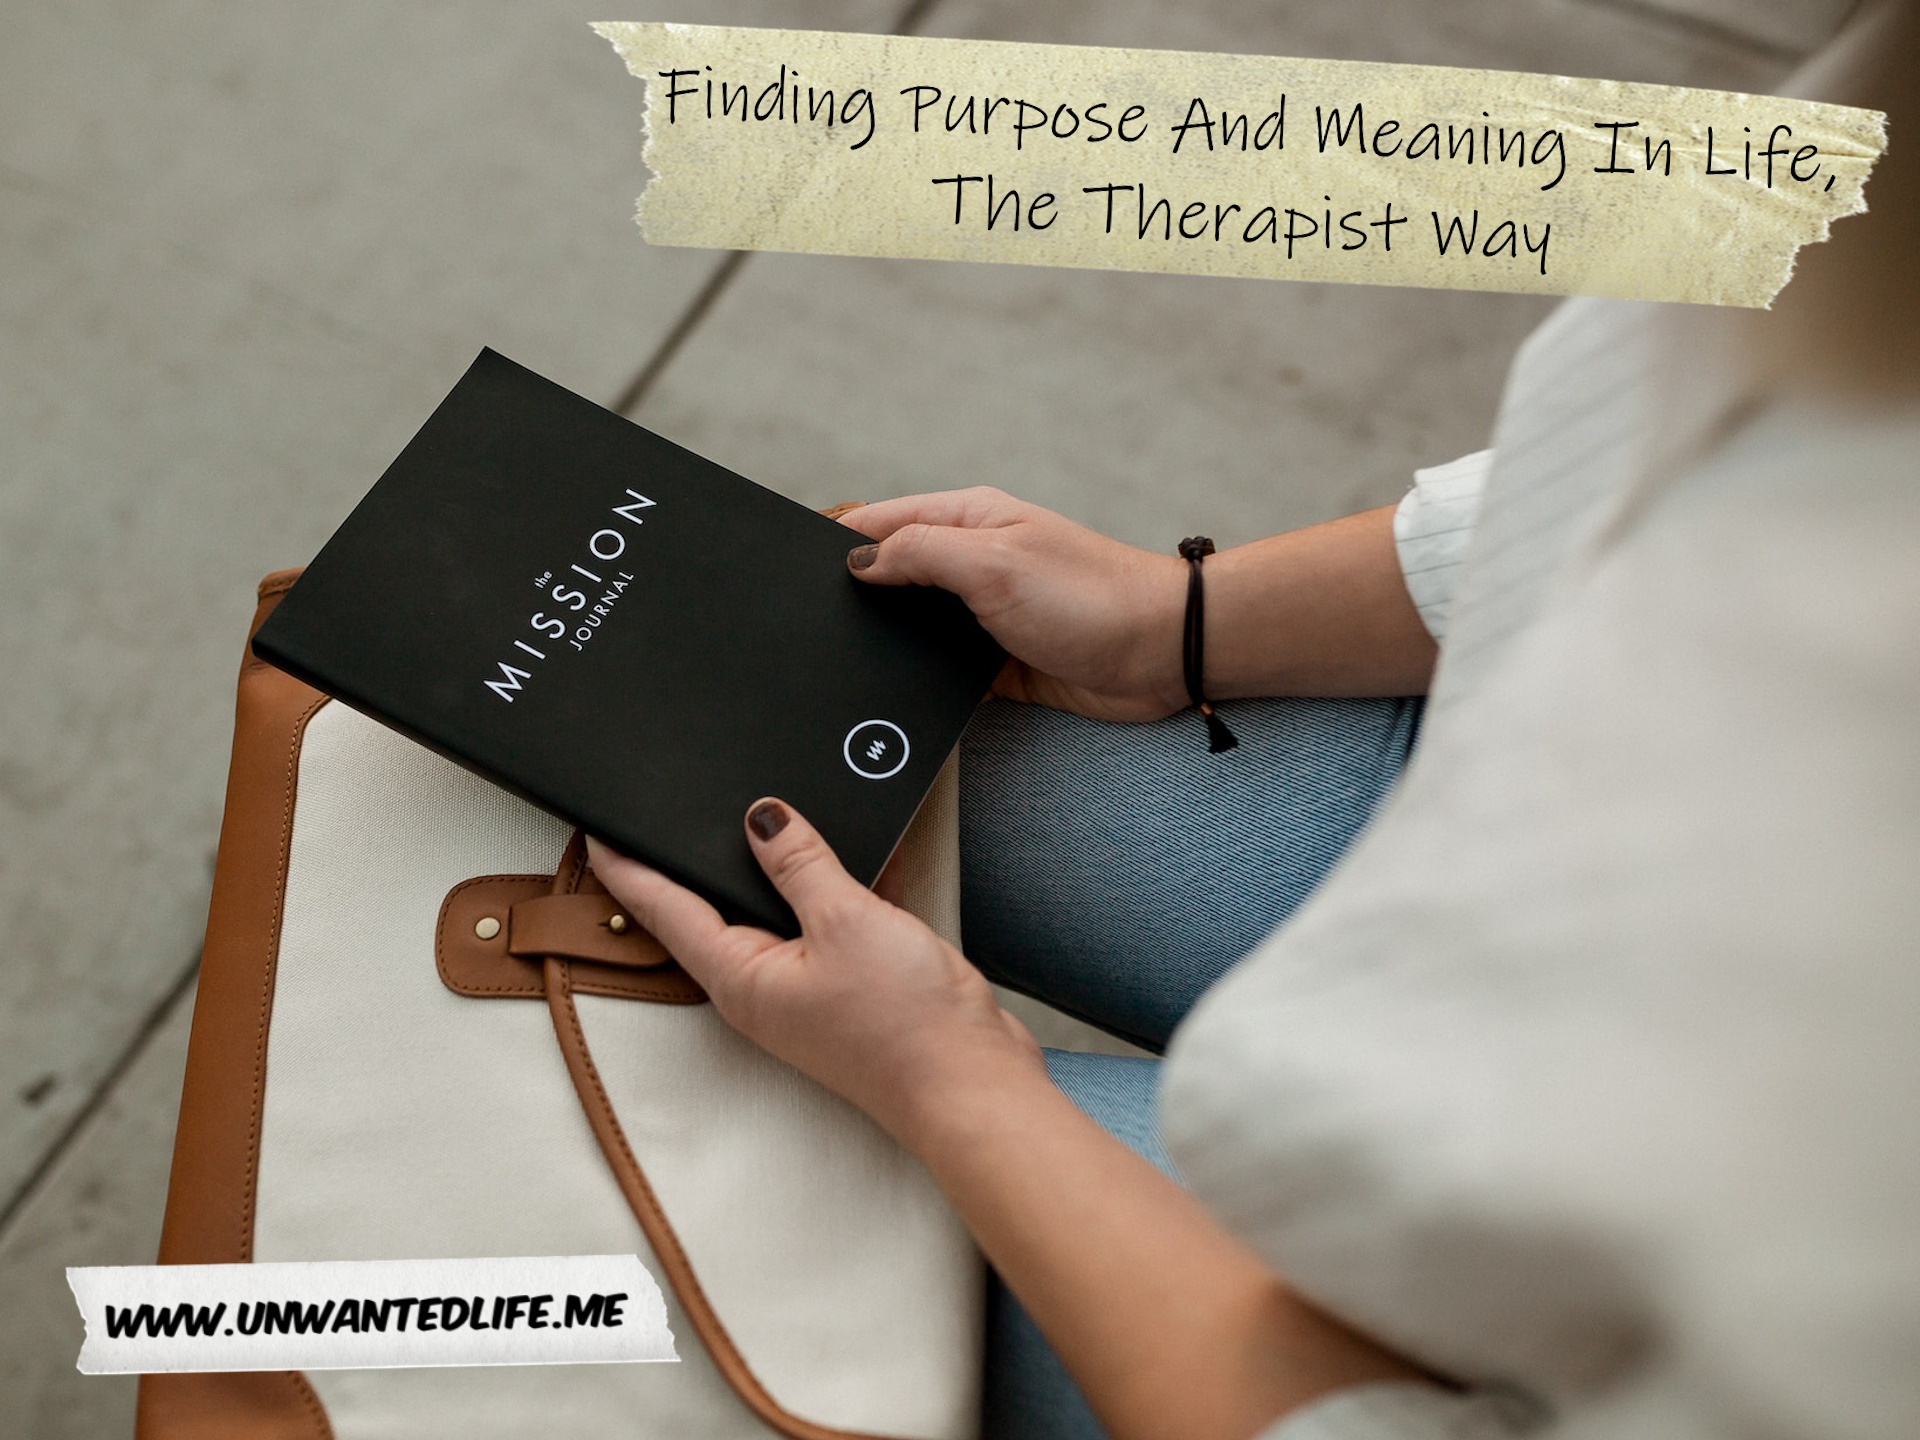 An image of a woman with "The Mission Journal" journal in her lap to represent the topic of the article - Finding Purpose And Meaning In Life, The Therapist Way